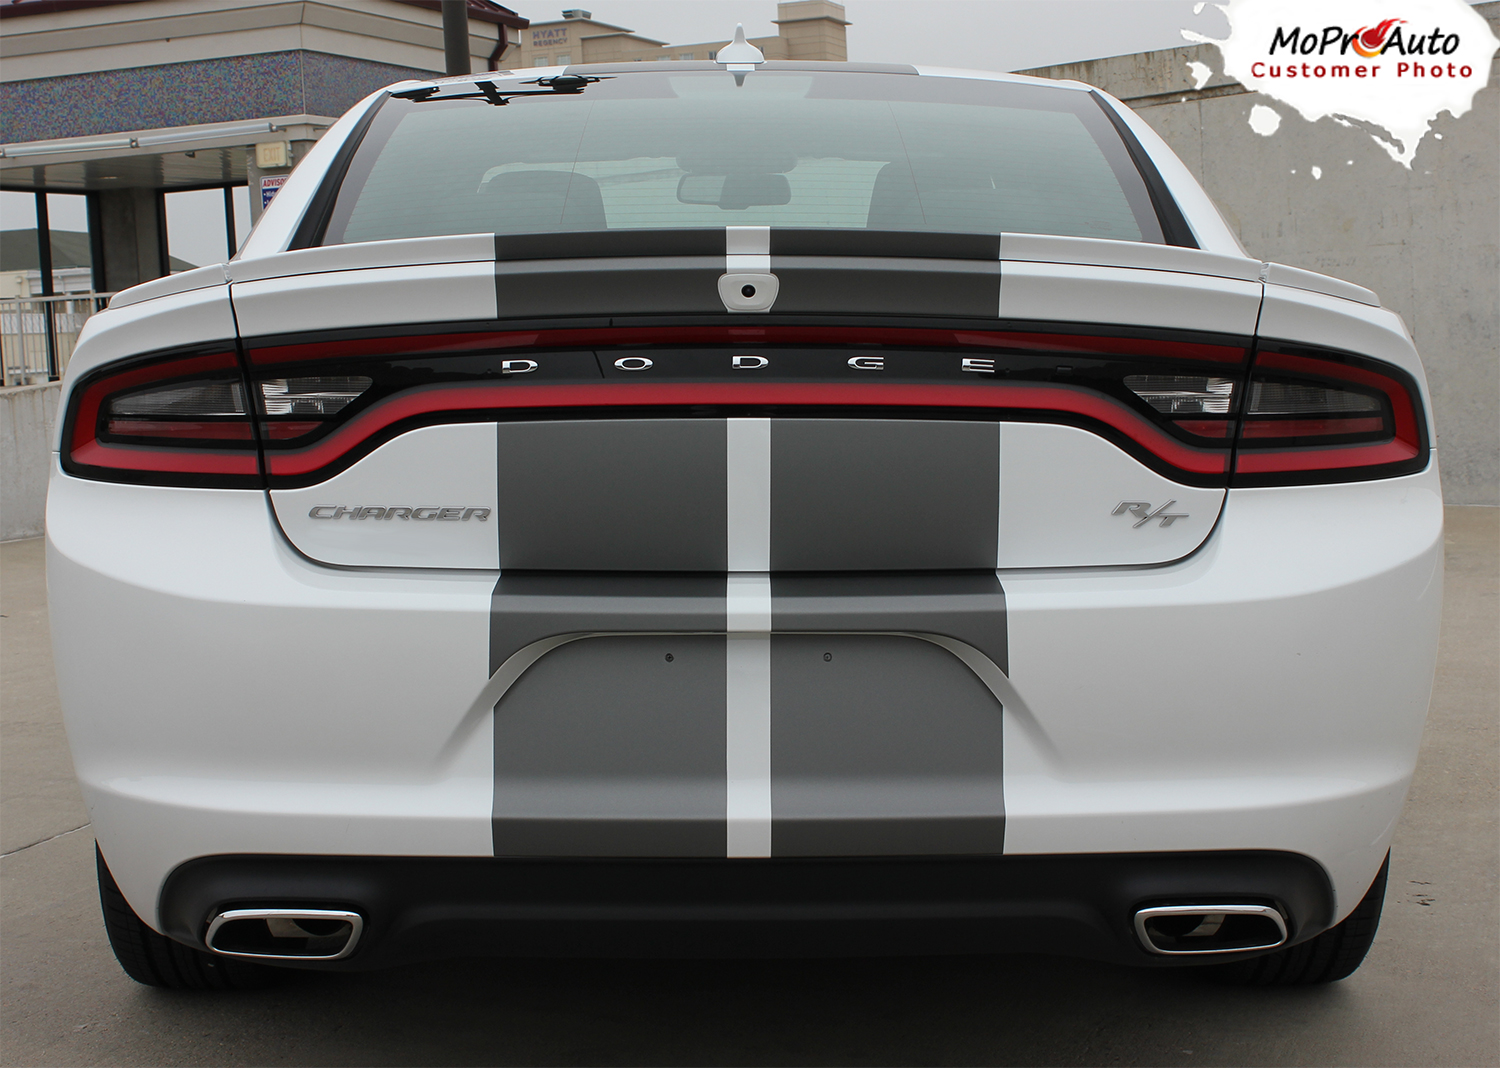 2015, 2016, 2017, 2018, 2019, 2020, 2021, 2022, 2023 Rally Racing Stripes Dodge Charger Vinyl Graphics, Striping and Decals Set